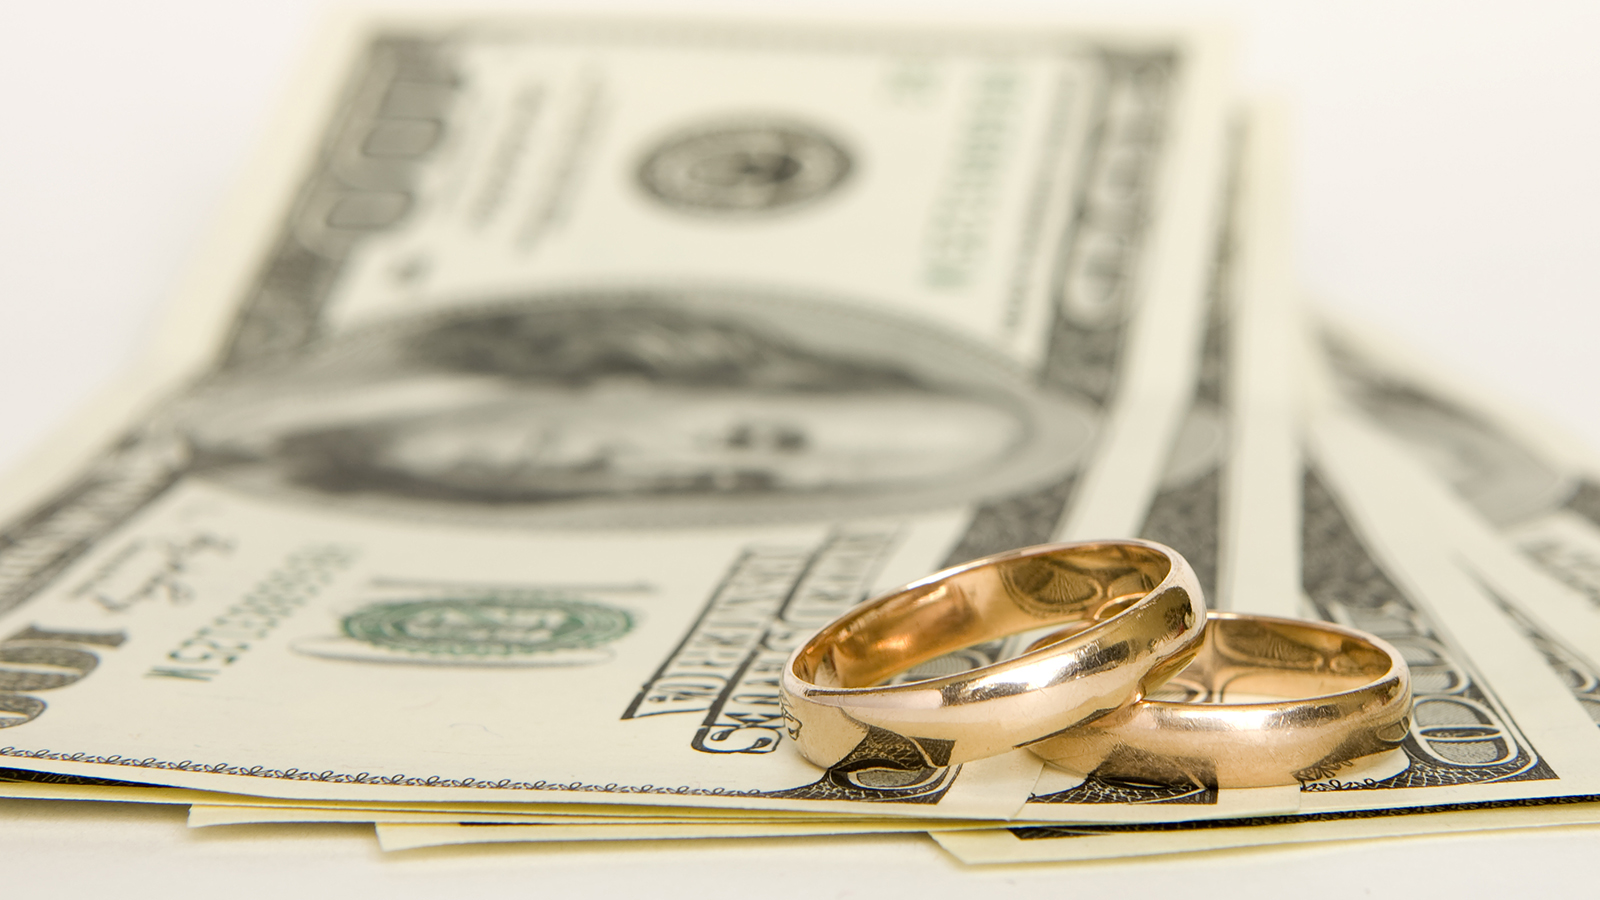 Wedding rings and money on a white background